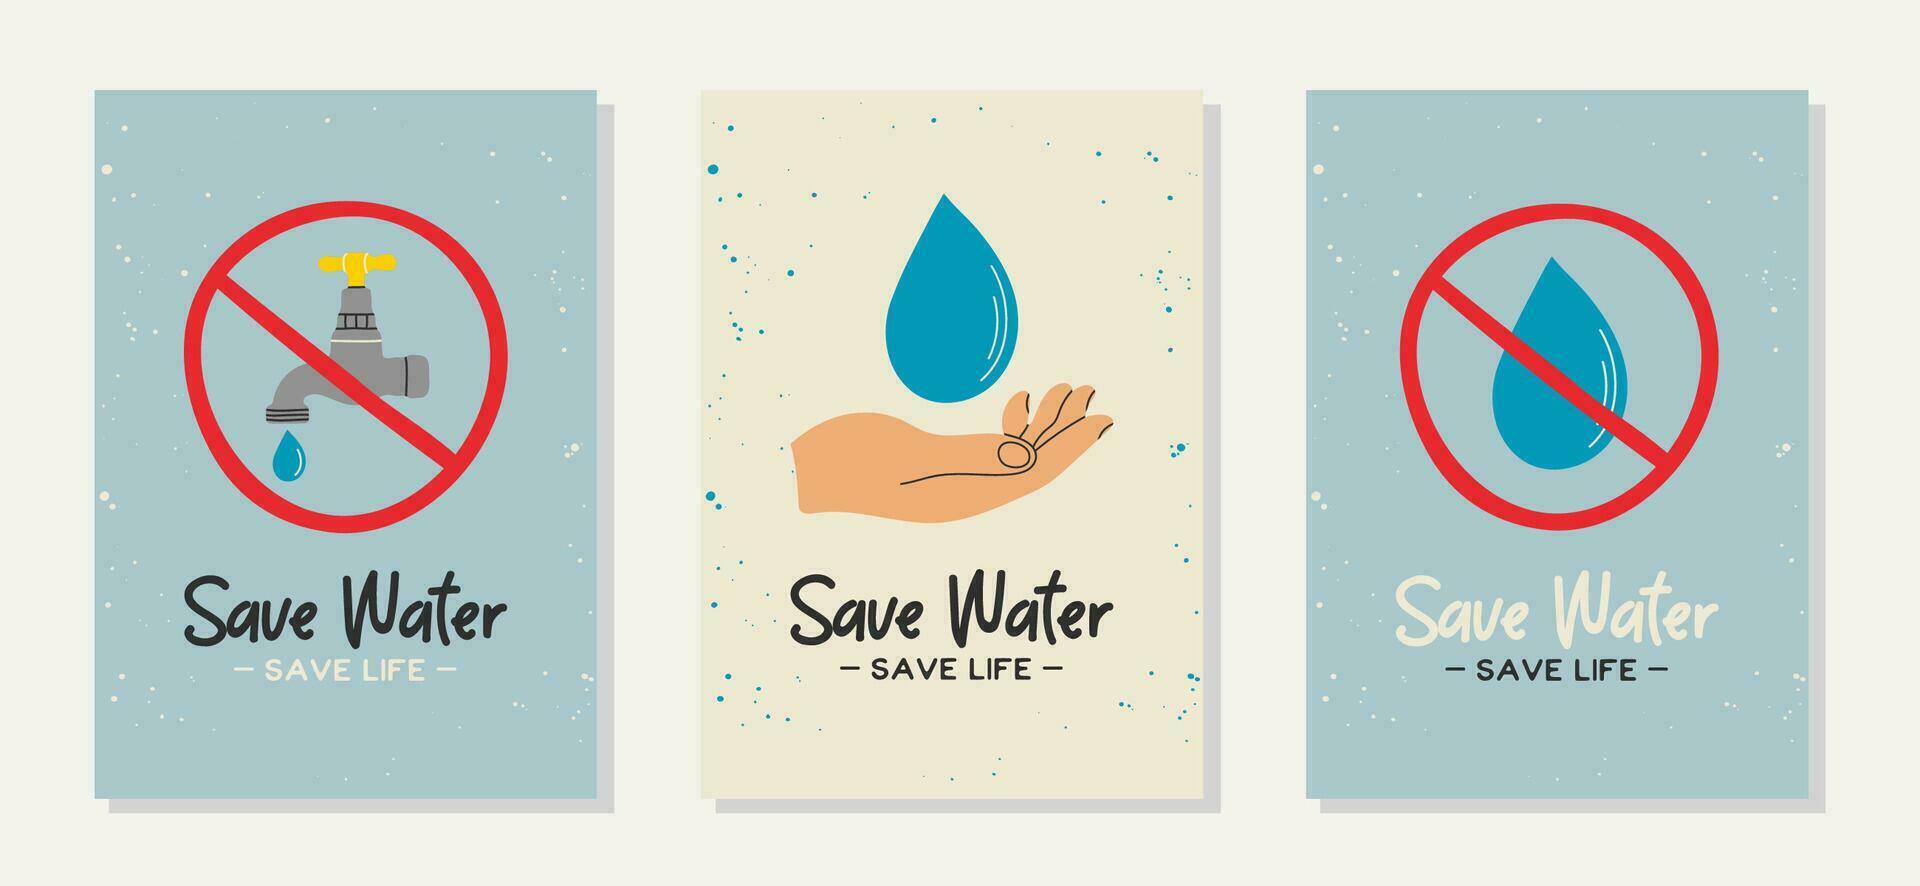 Set of 3 posters flat line modern style with phrases, quotes. Ecology motivation, save water, save life, do not waste. Hand drawn vector illustrations of human hand, drop, tap, prohibition sign.